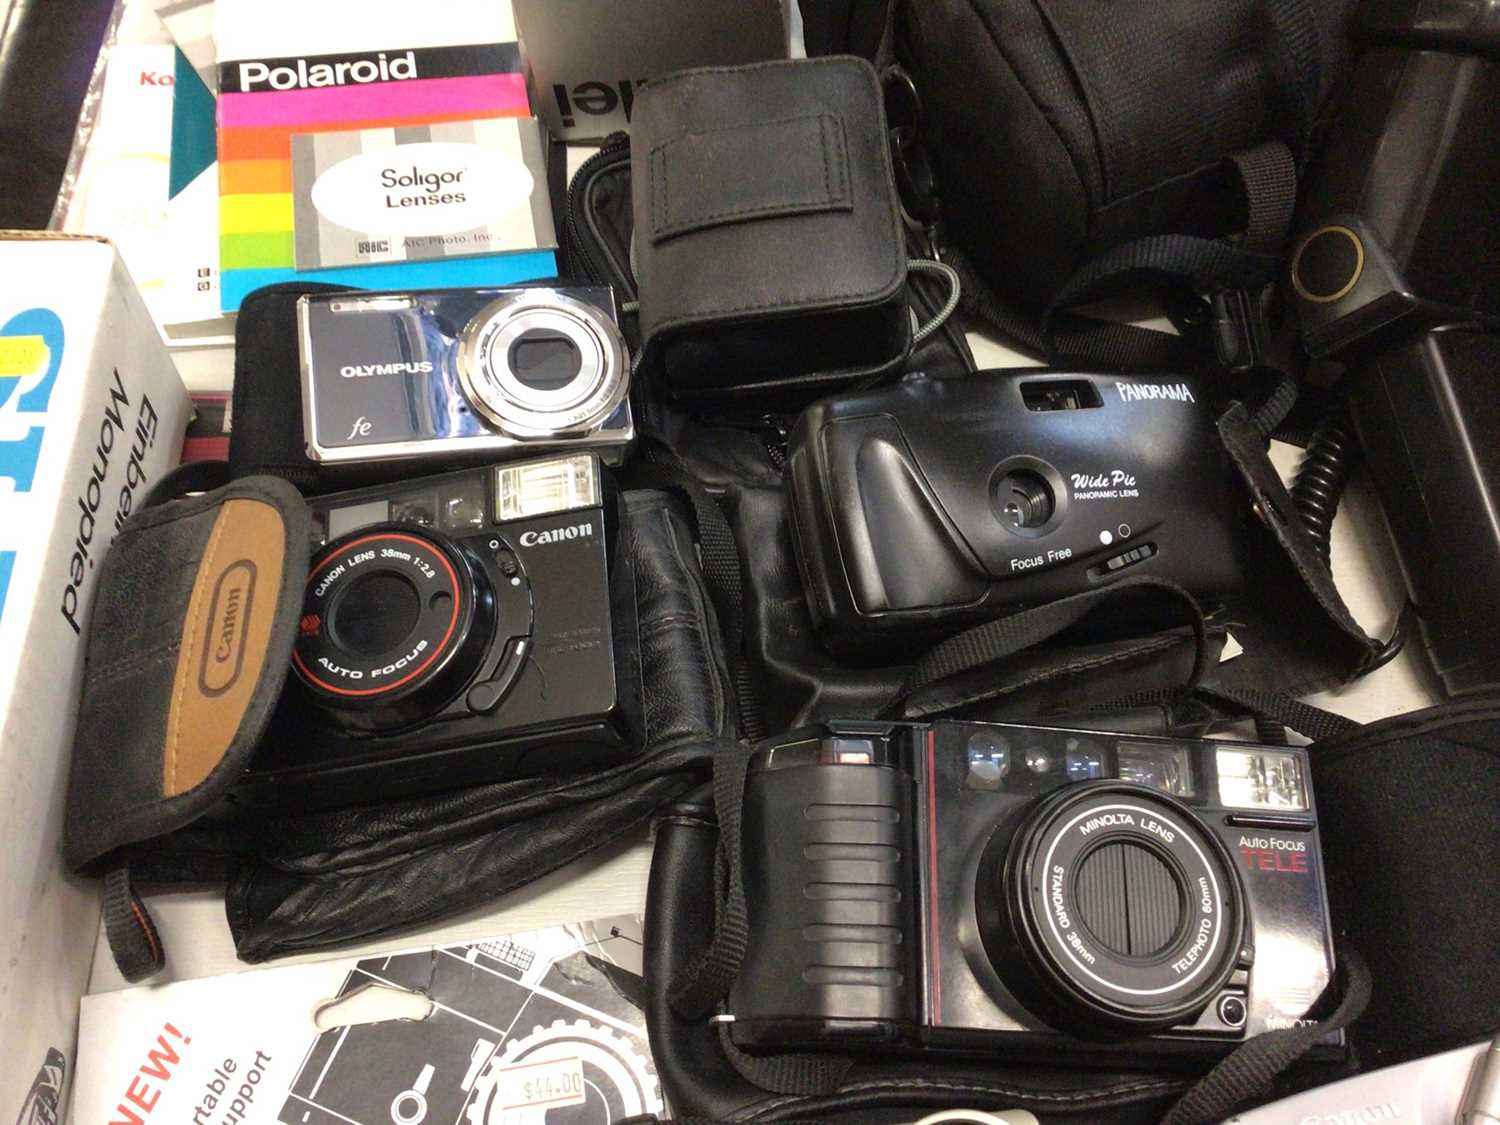 Group of digital and other cameras including Kodak, Minolta, Olympus etc tripods and accessories - Image 3 of 5